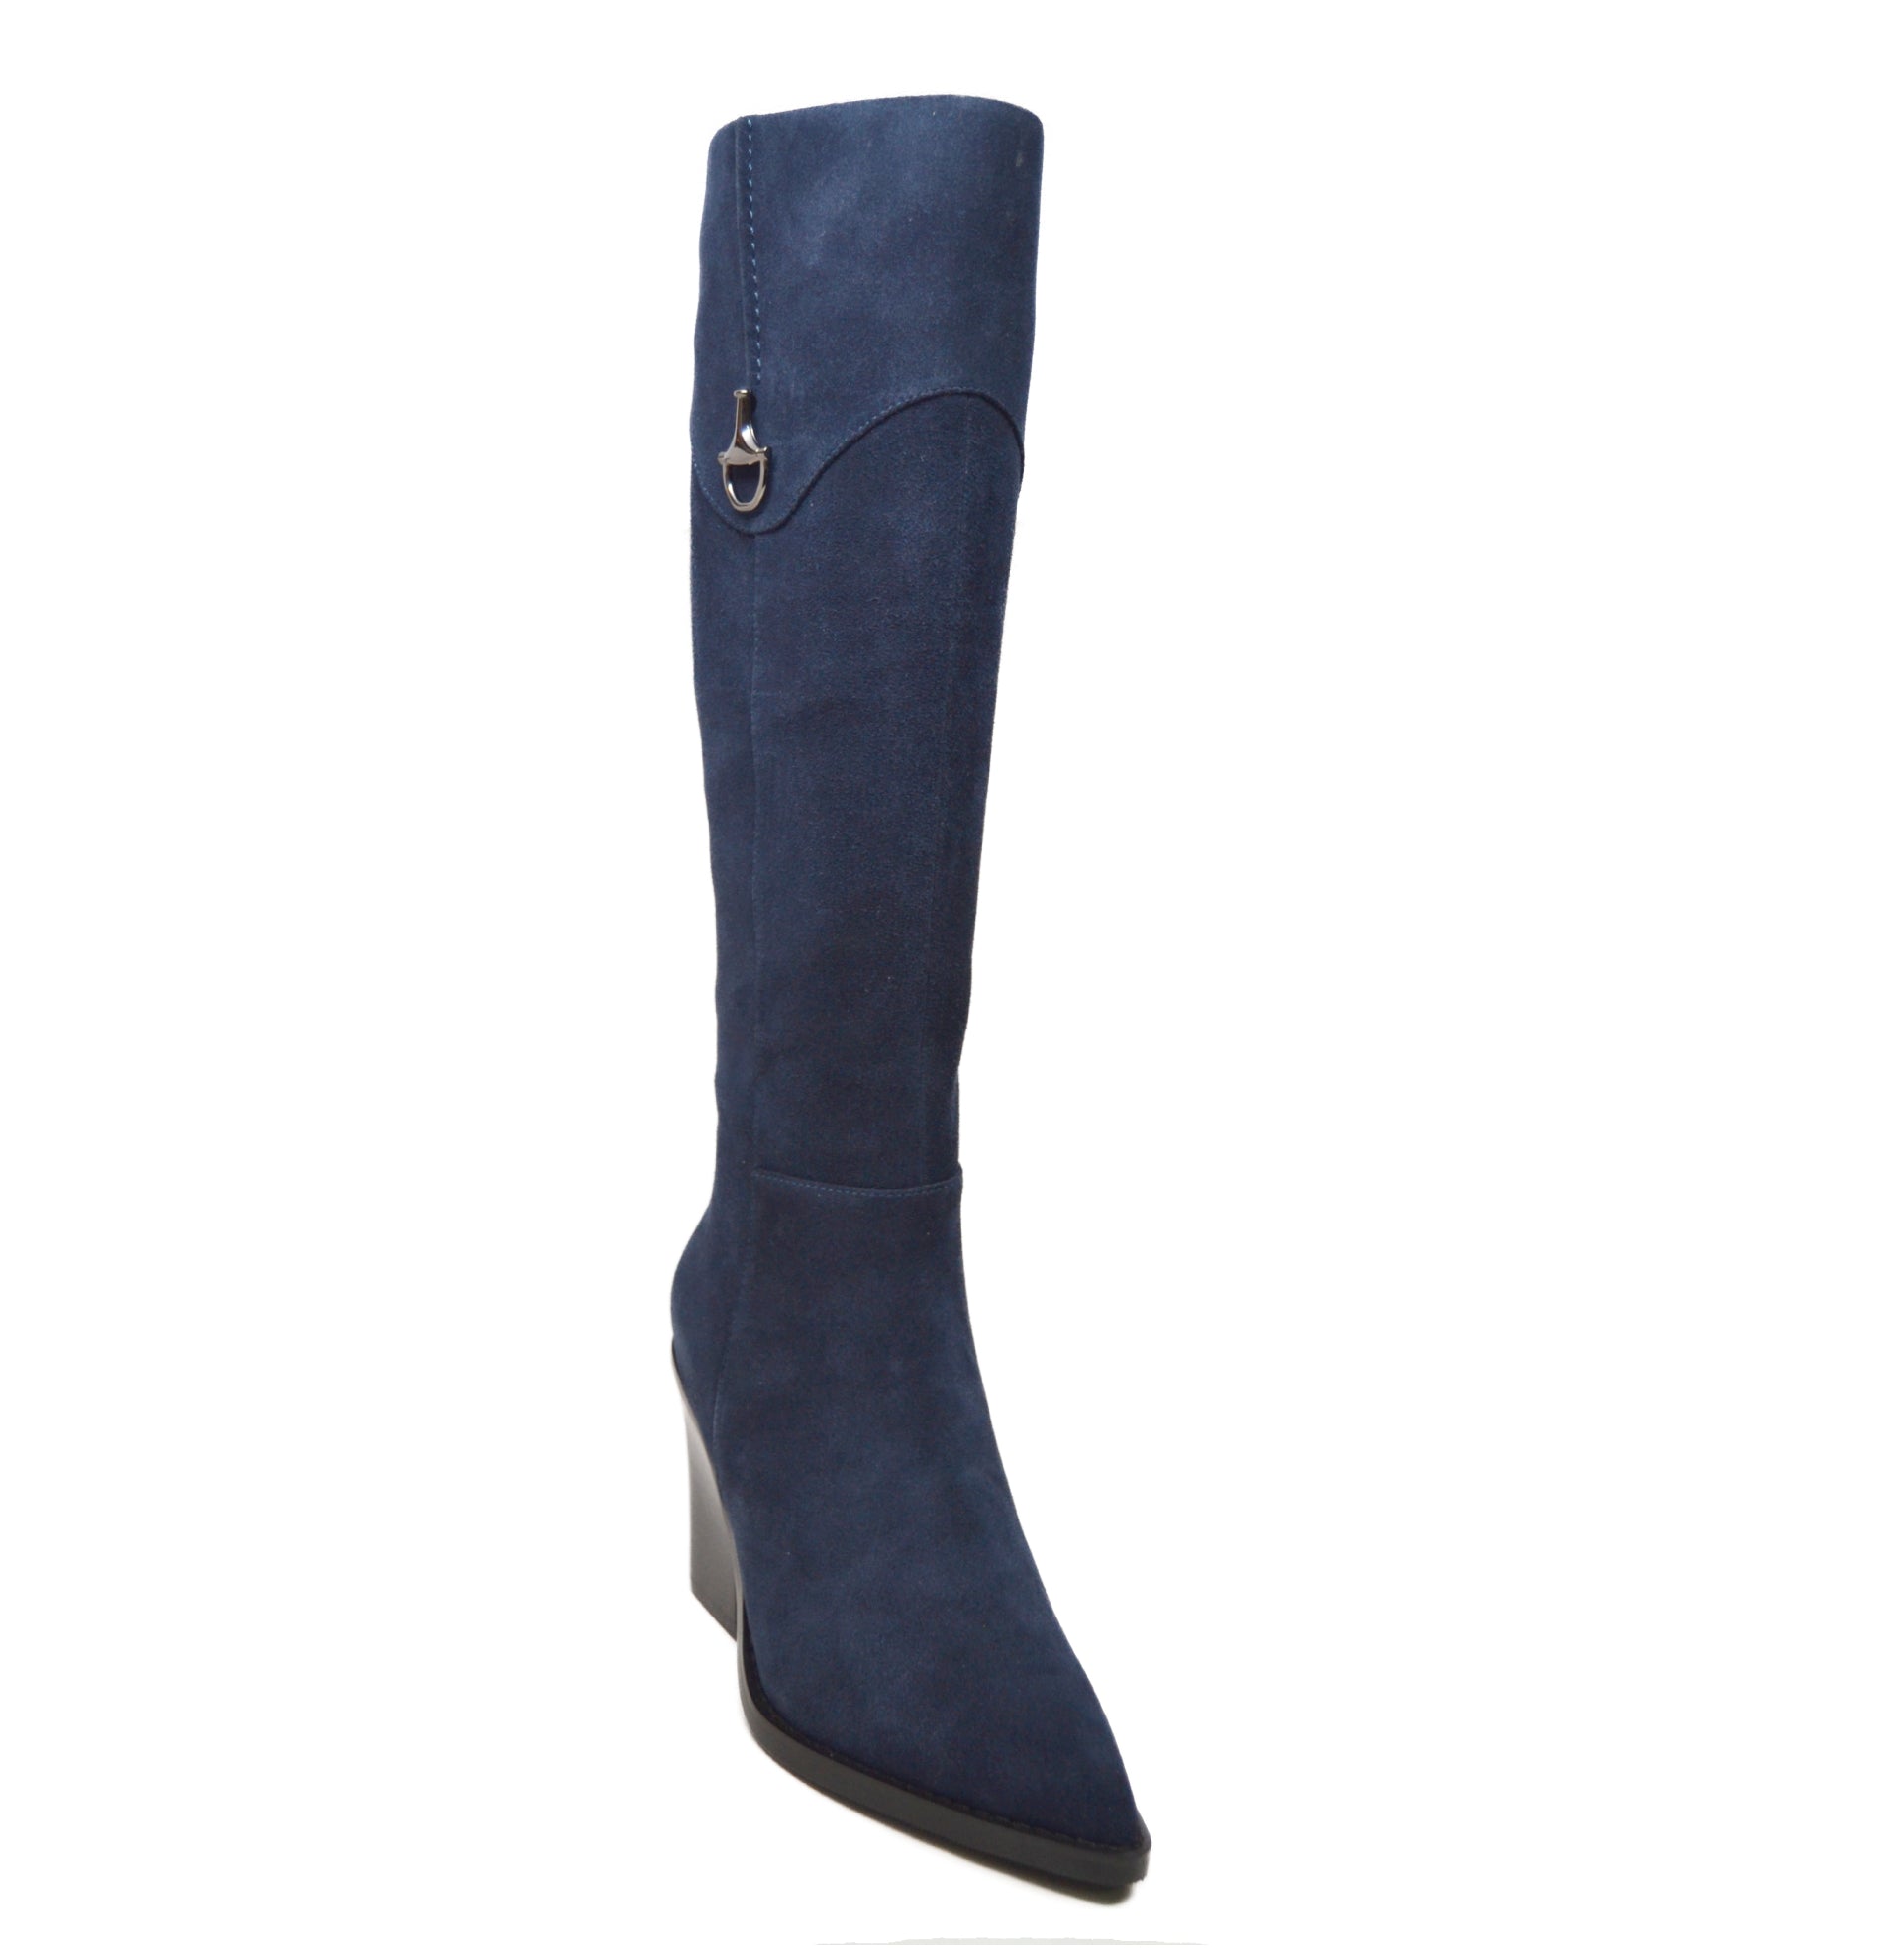 Capri Dress Boots: Stylish and Comfortable Footwear for Any